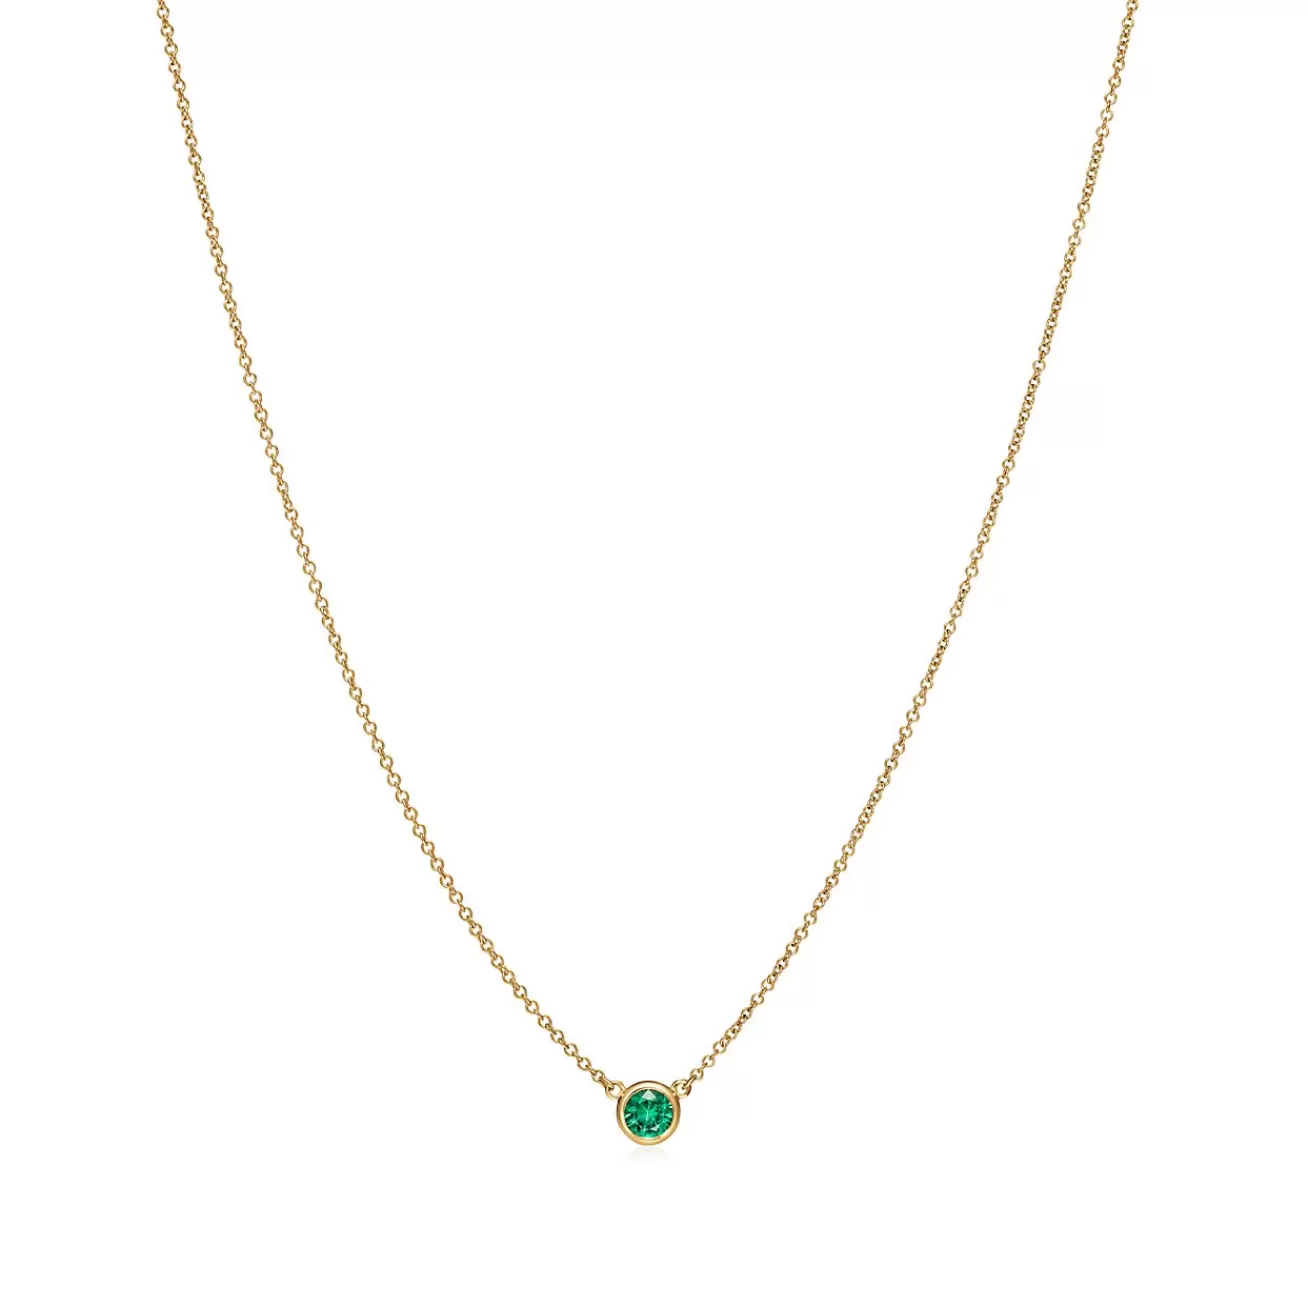 Tiffany & Co. Elsa Peretti® Color by the Yard Pendant in Yellow Gold with an Emerald | ^ Necklaces & Pendants | Gold Jewelry